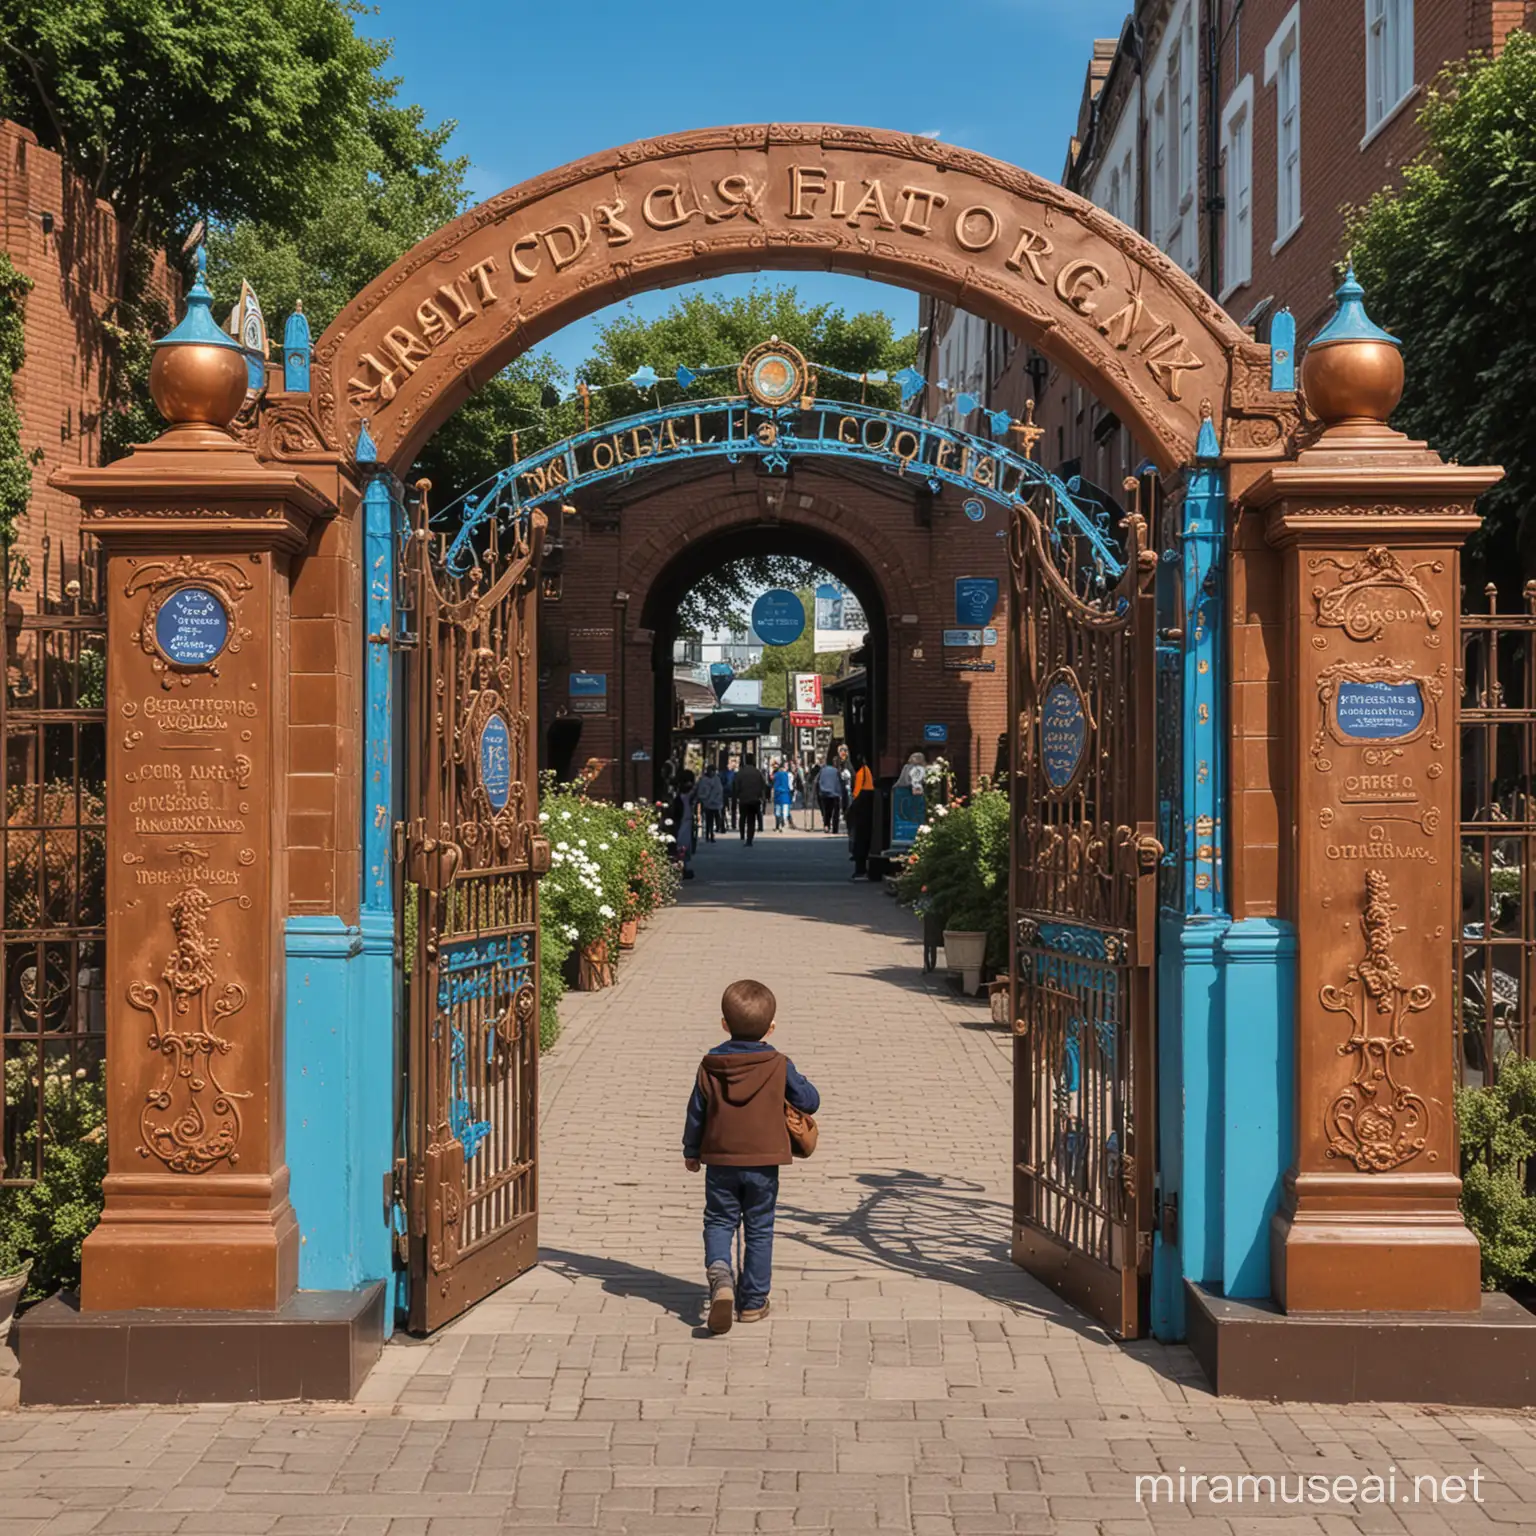 Magical Gateway with Blue and Copper Exhibits Featuring a Smart OneYearOld Chocolate Boy